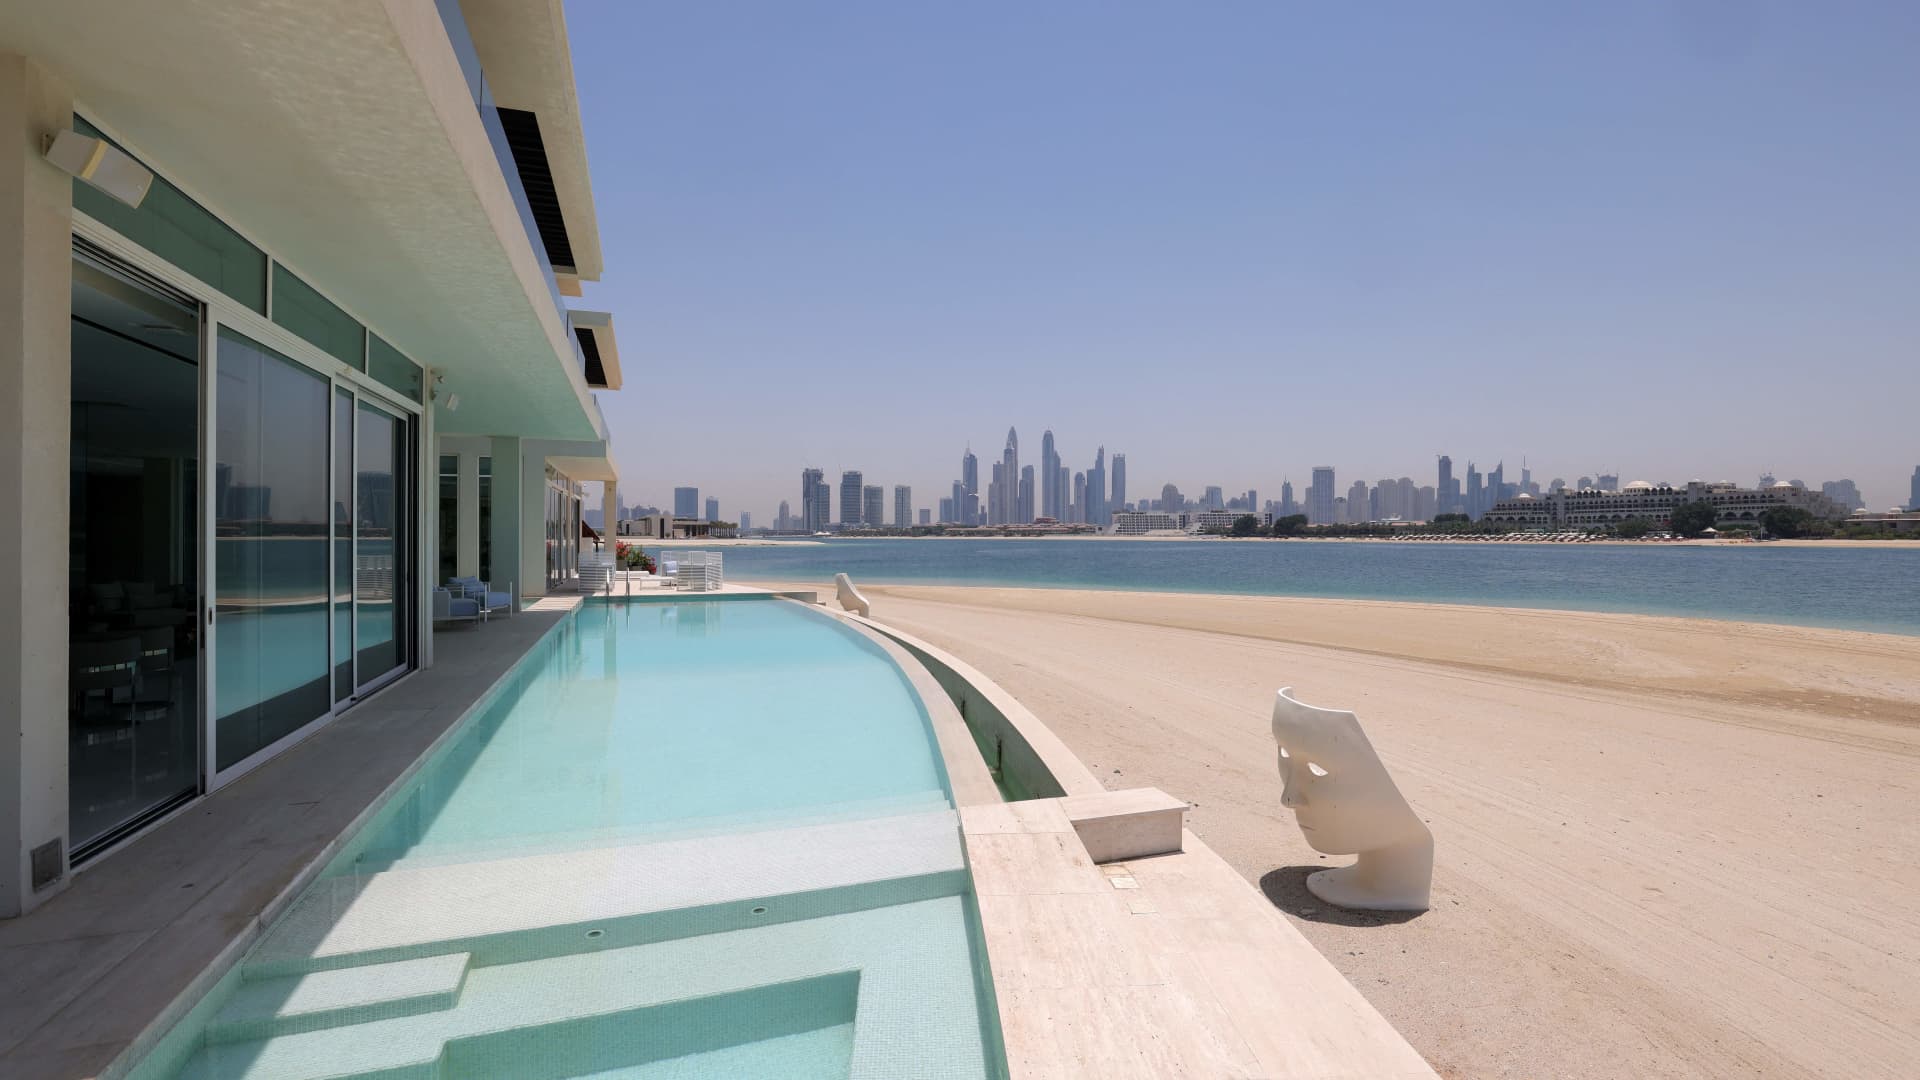 The swimming pool of a luxury villa for sale on Dubai's Palm Jumeirah, on May 19, 2021.